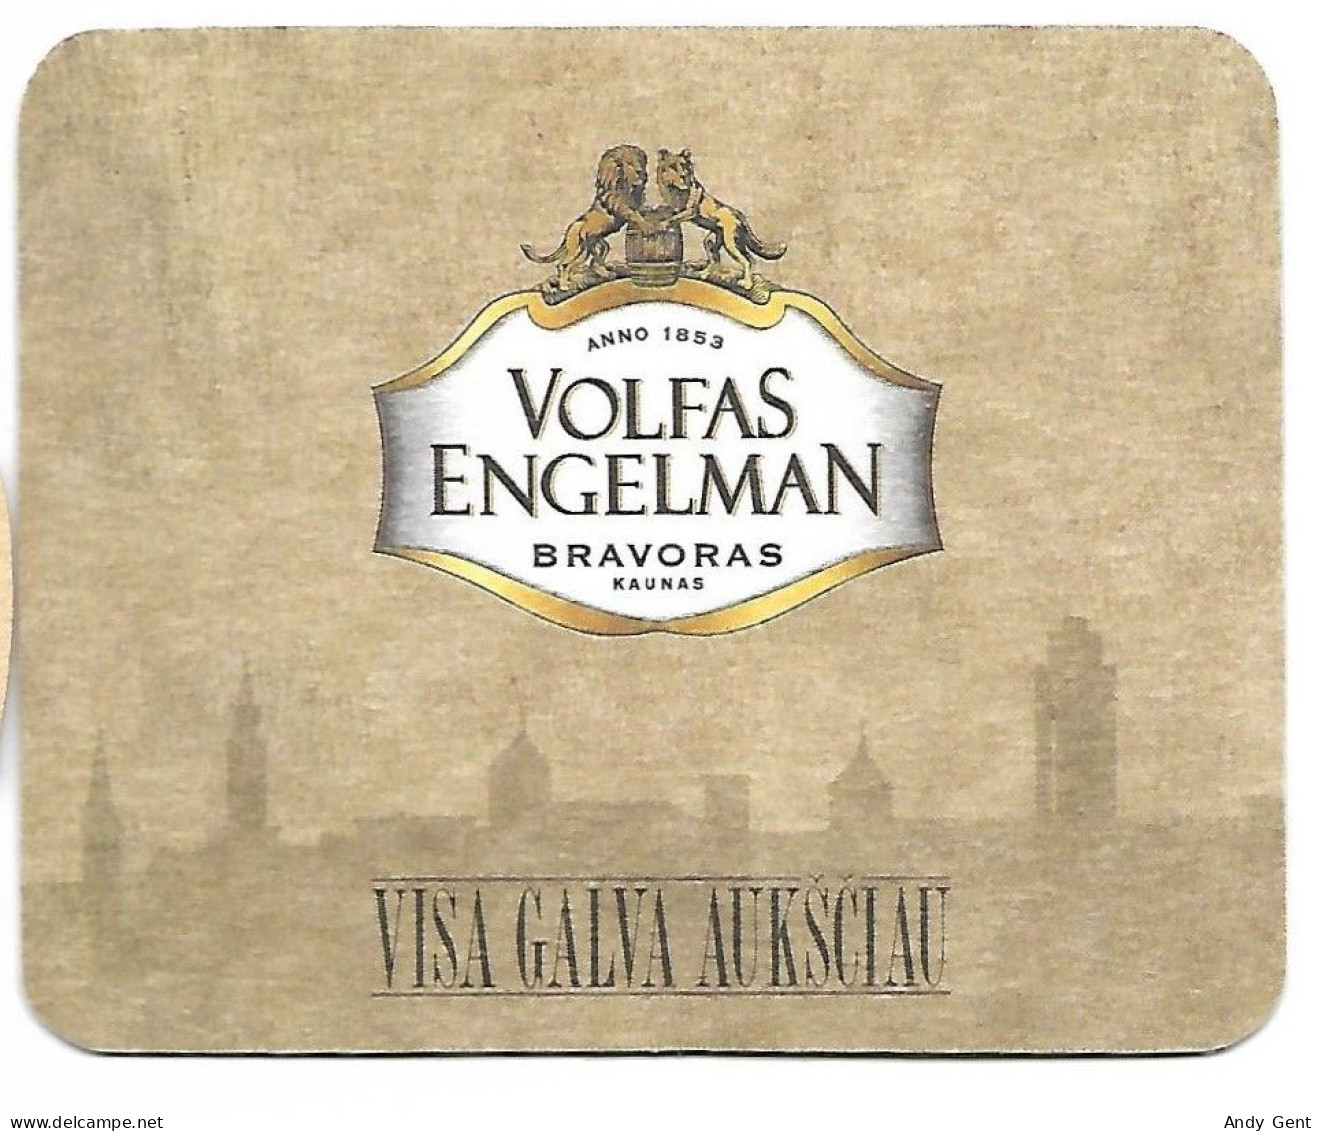 #84 Volfas Engelman Lithuania (new) - Sotto-boccale